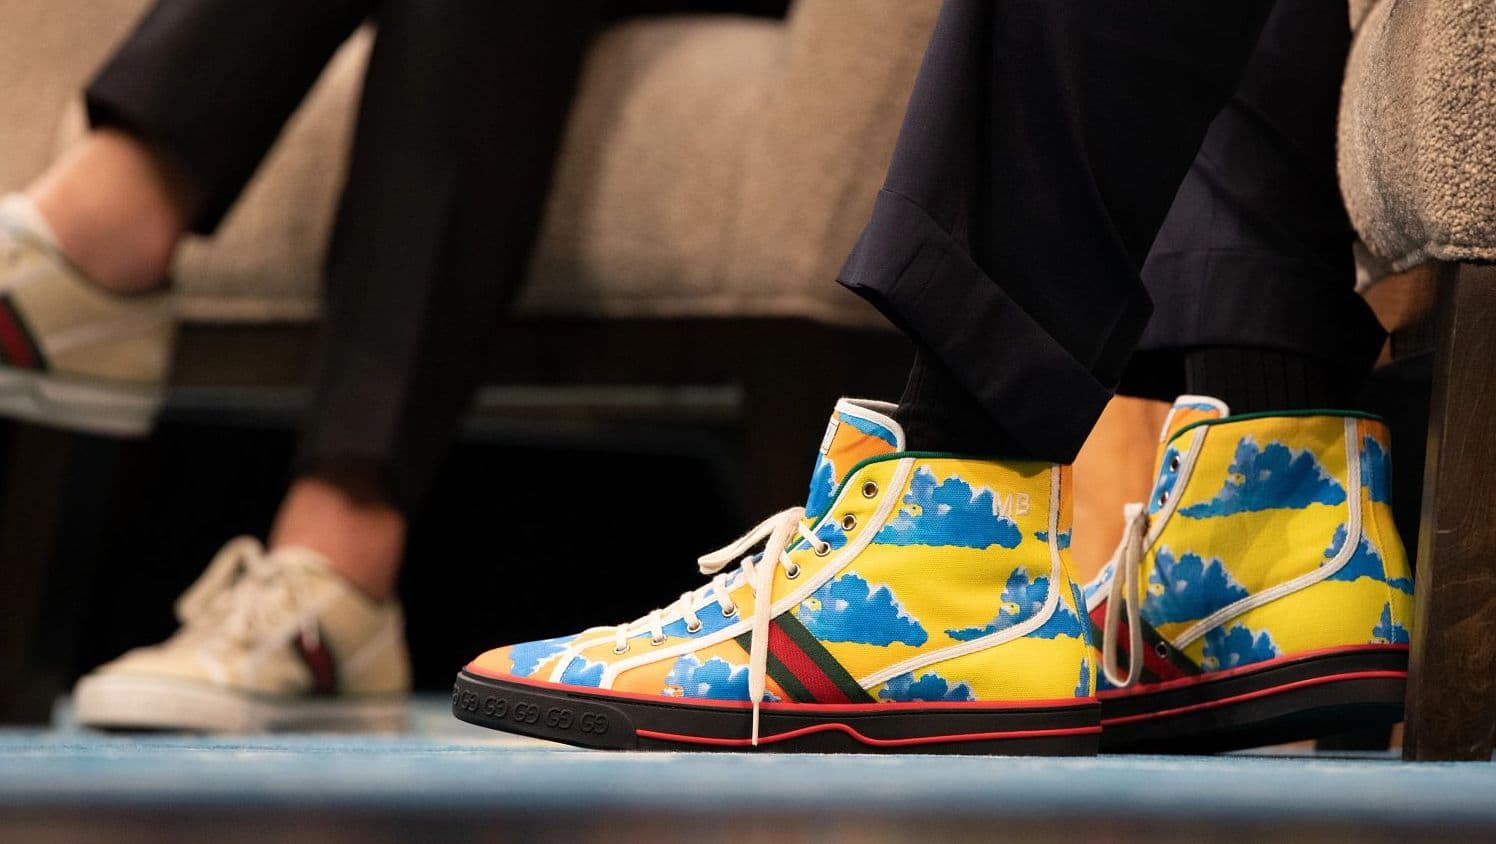 Marc Benioff’s custom Gucci high-top sneakers decorated with the Salesforce cloud company logo